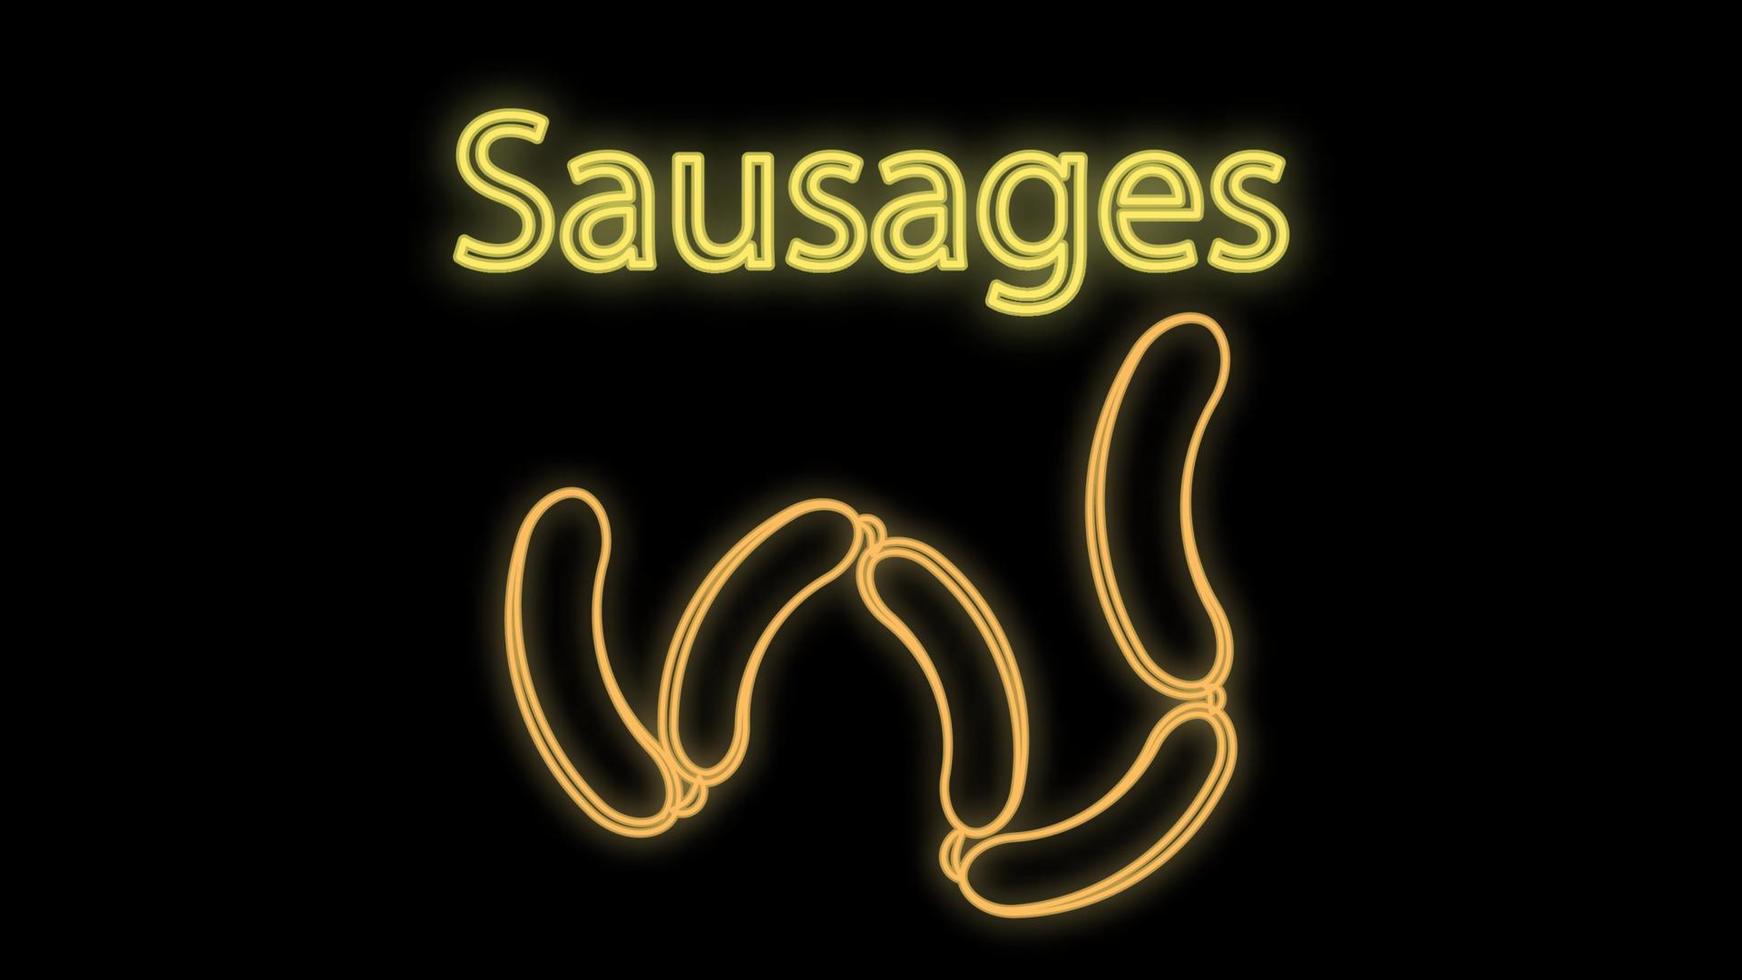 sausages on a black background, vector illustration, neon. a bunch of sausages for lunch and dinner. neon yellow sausages. bright signboard, illumination for cafes and restaurants